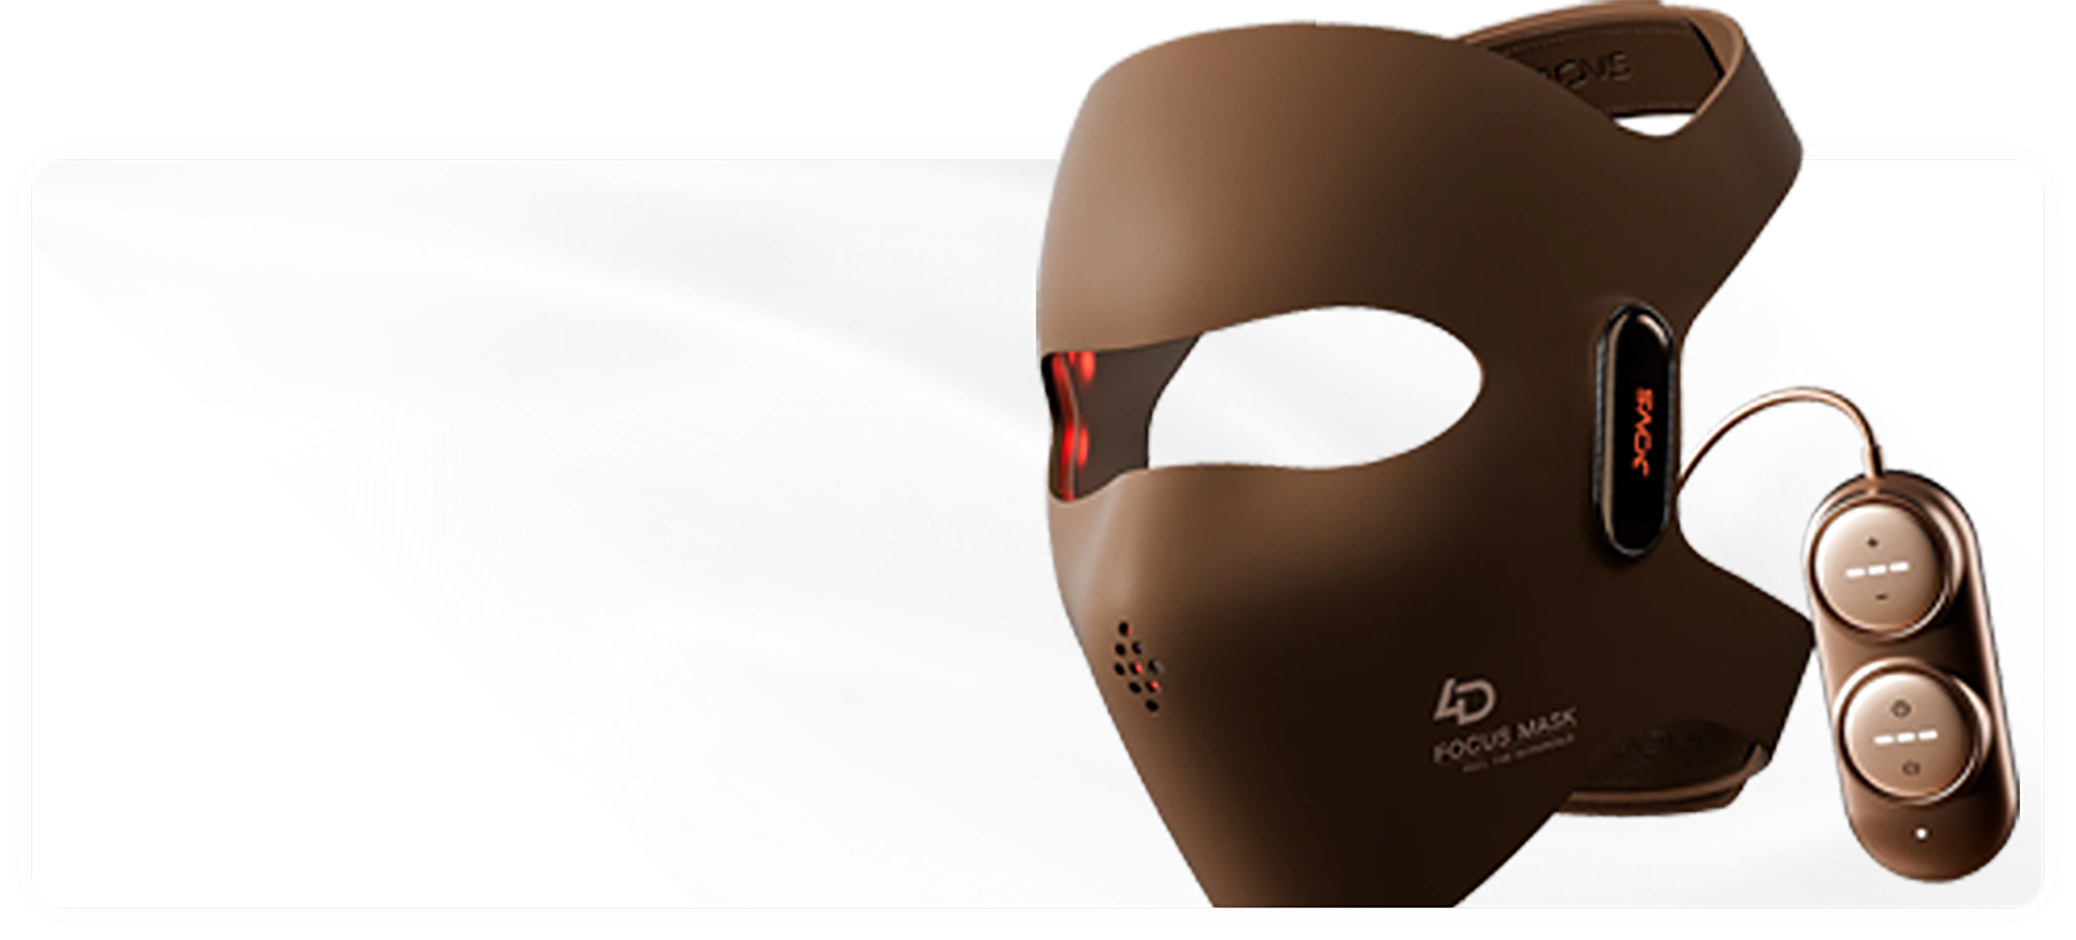 JOVS 4D Laser Light Therapy Mask offers a high-tech, targeted treatment for skin rejuvenation and anti-aging.